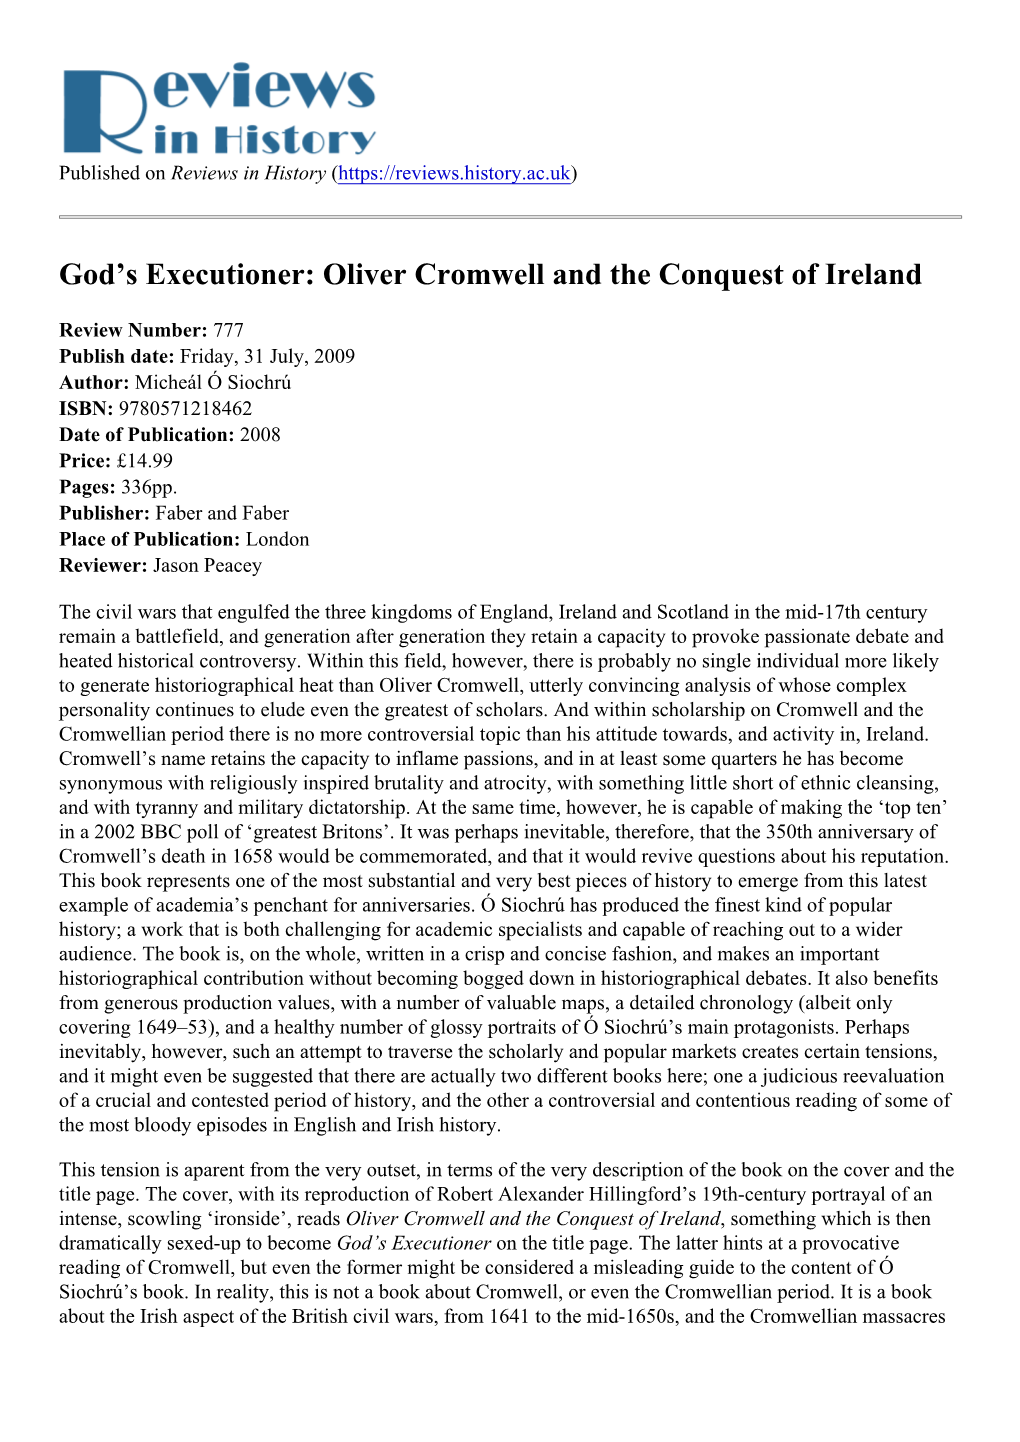 Oliver Cromwell and the Conquest of Ireland